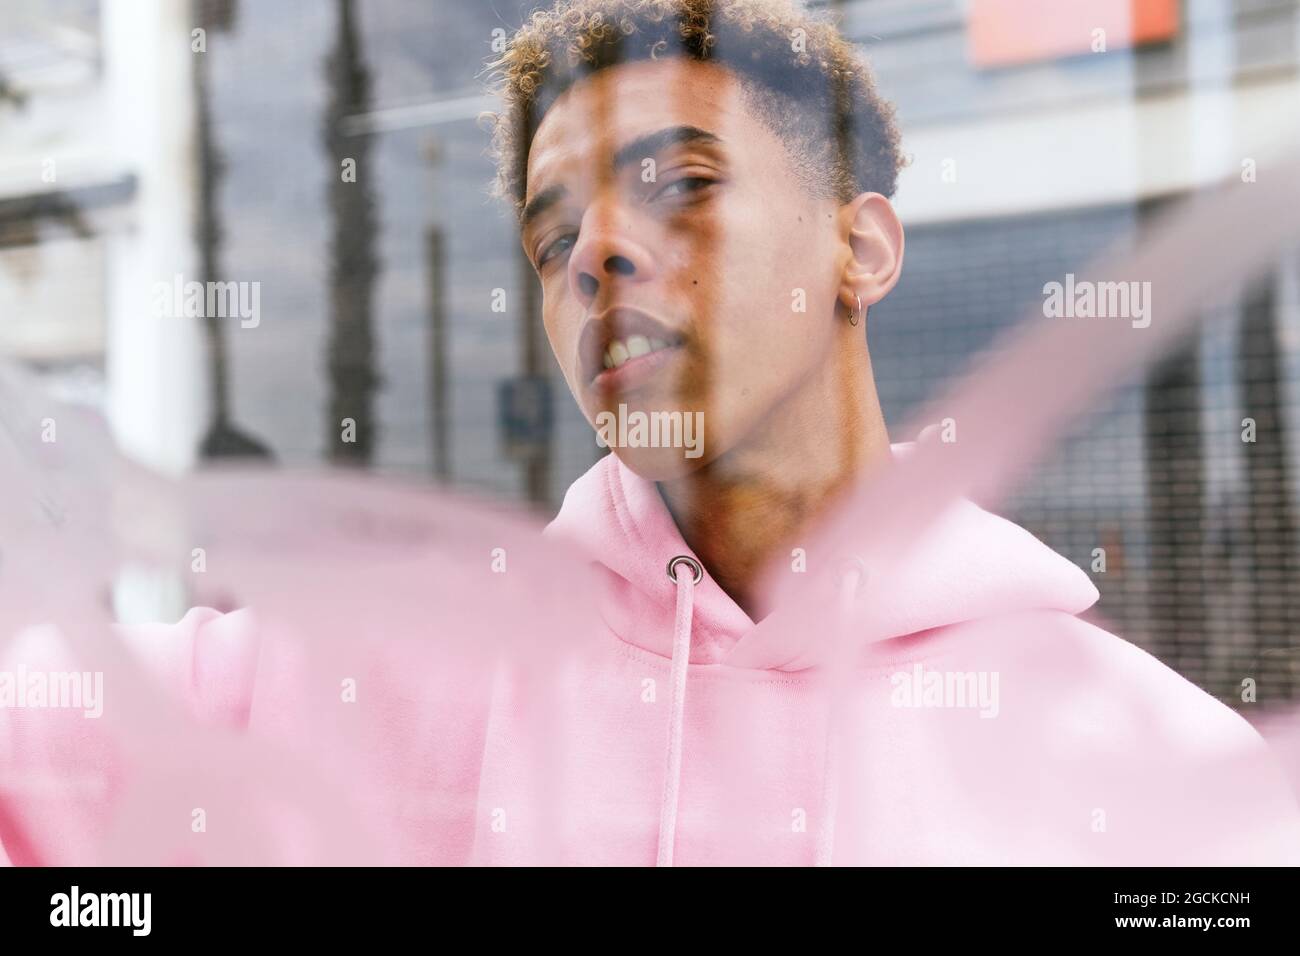 Through glass of serious young ethnic hipster guy with Afro hairstyle dressed in pink hoodie at window and looking at camera Stock Photo